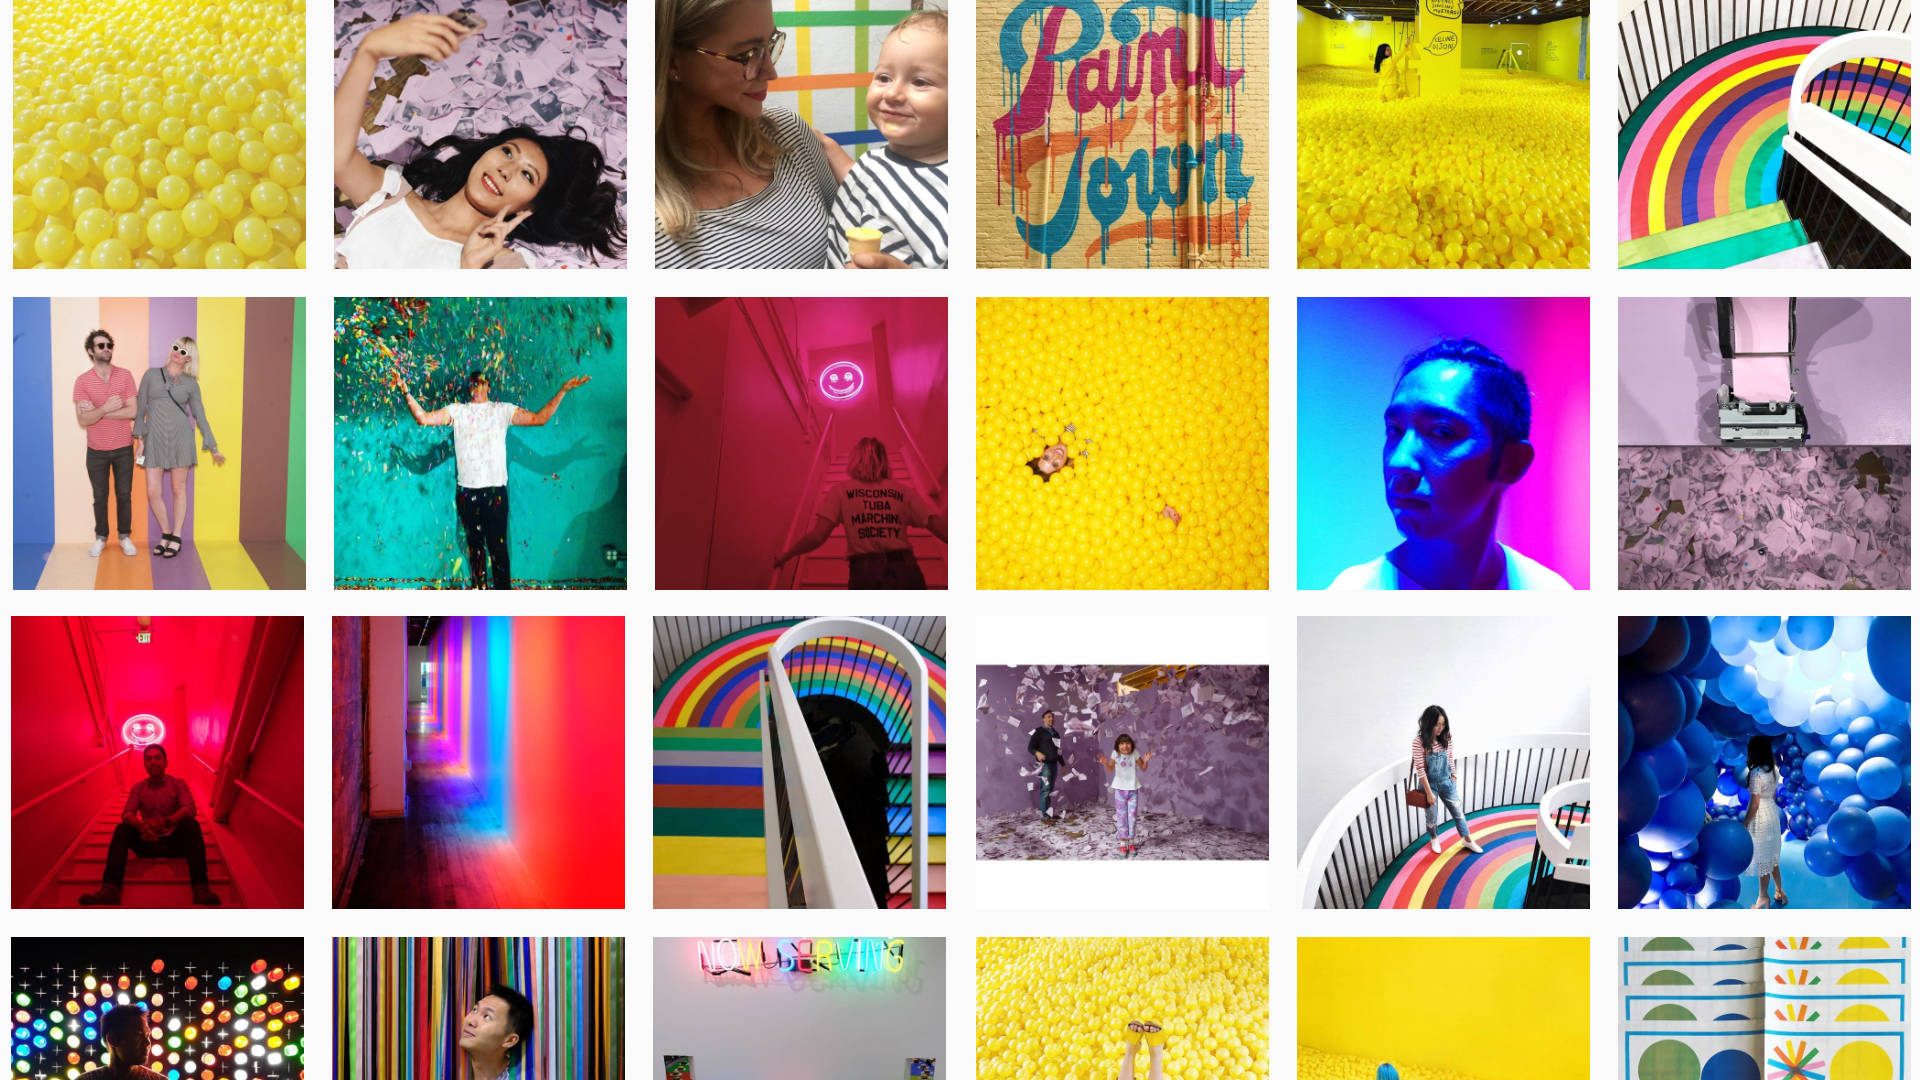 Public images tagged #colorfactoryco on Instagram. Courtesy of Instagram